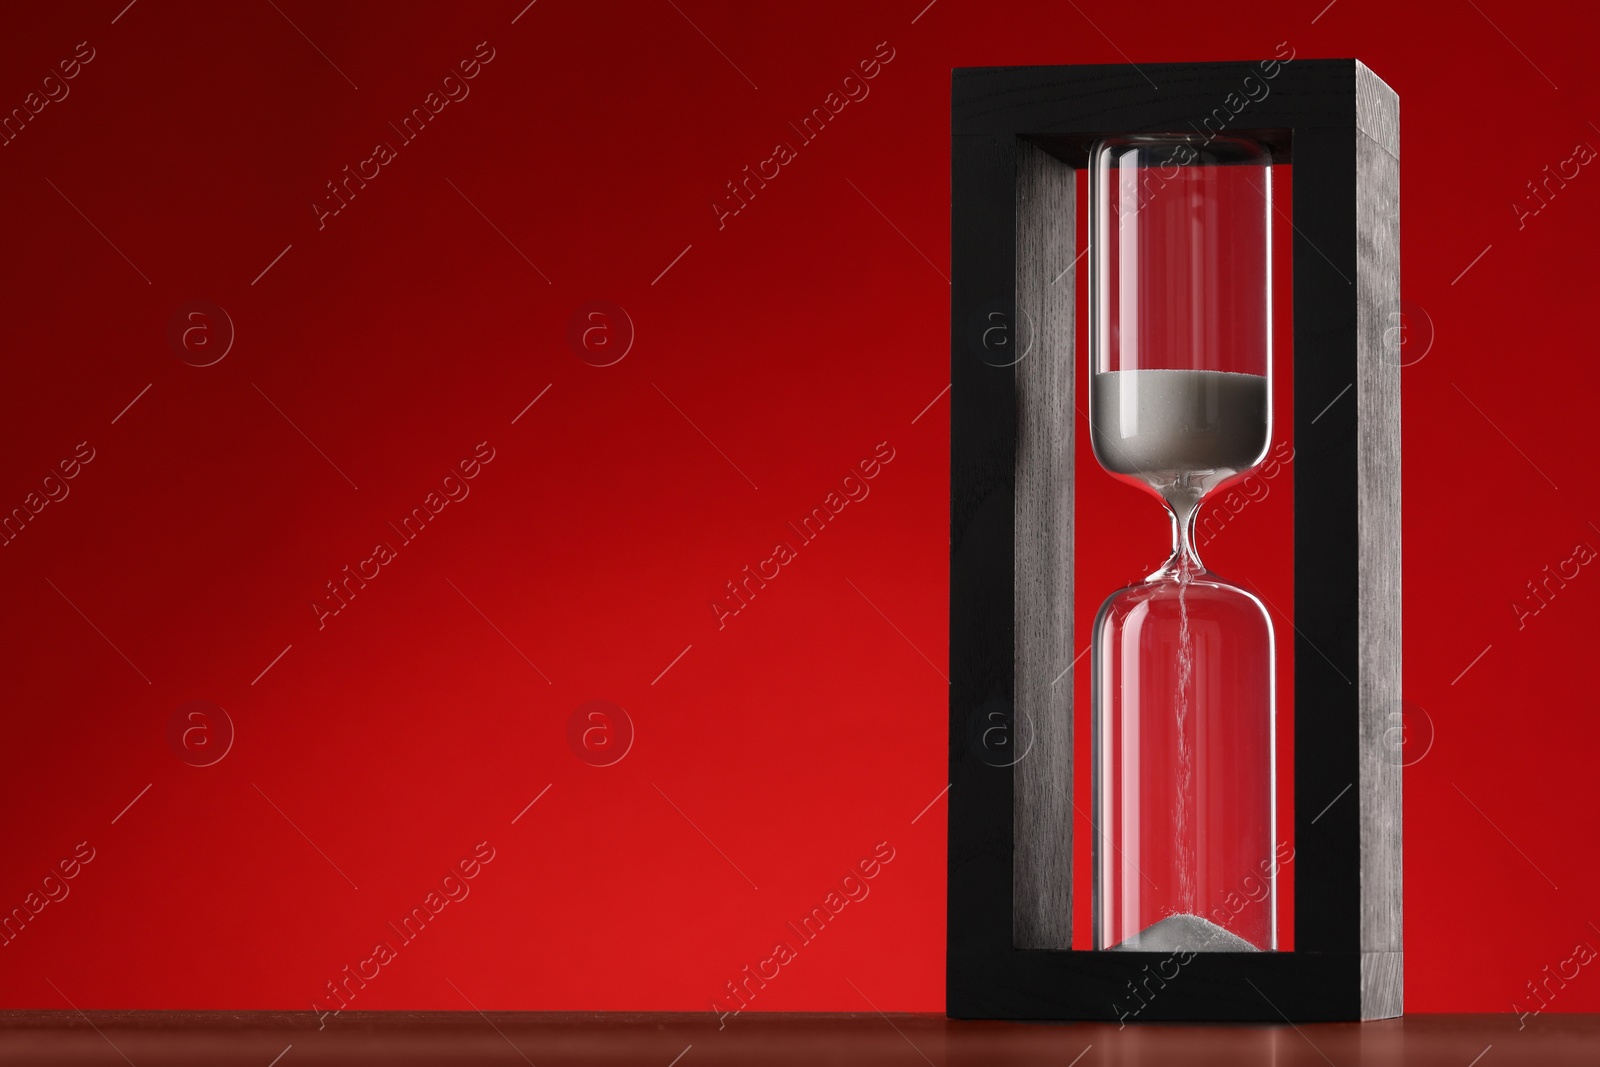 Photo of Hourglass with flowing sand on wooden table against red background, space for text